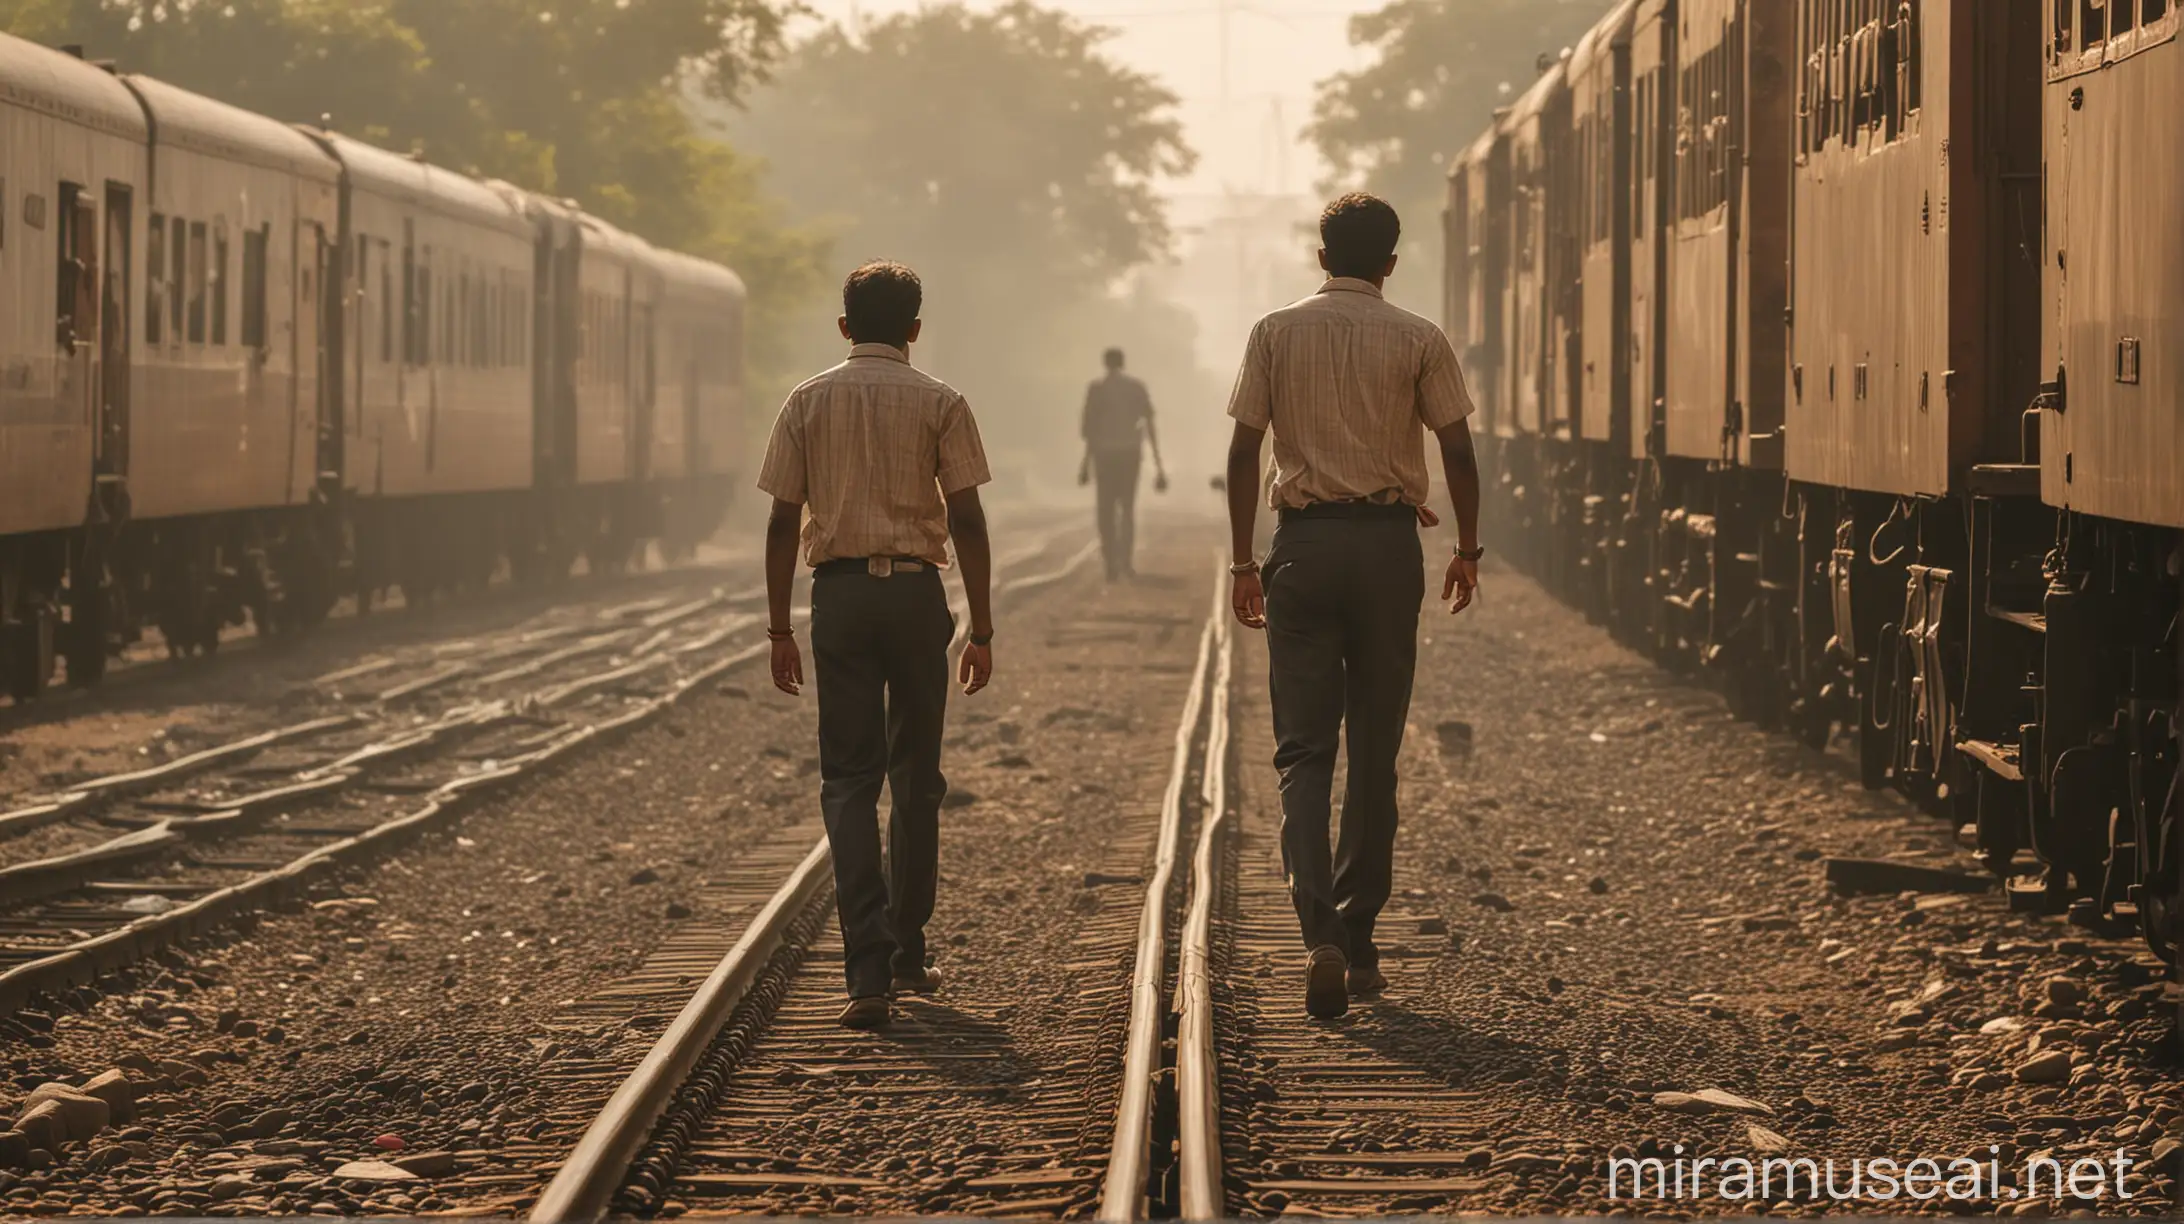 Two Indian Men Standing on Track in Front of Indian Train